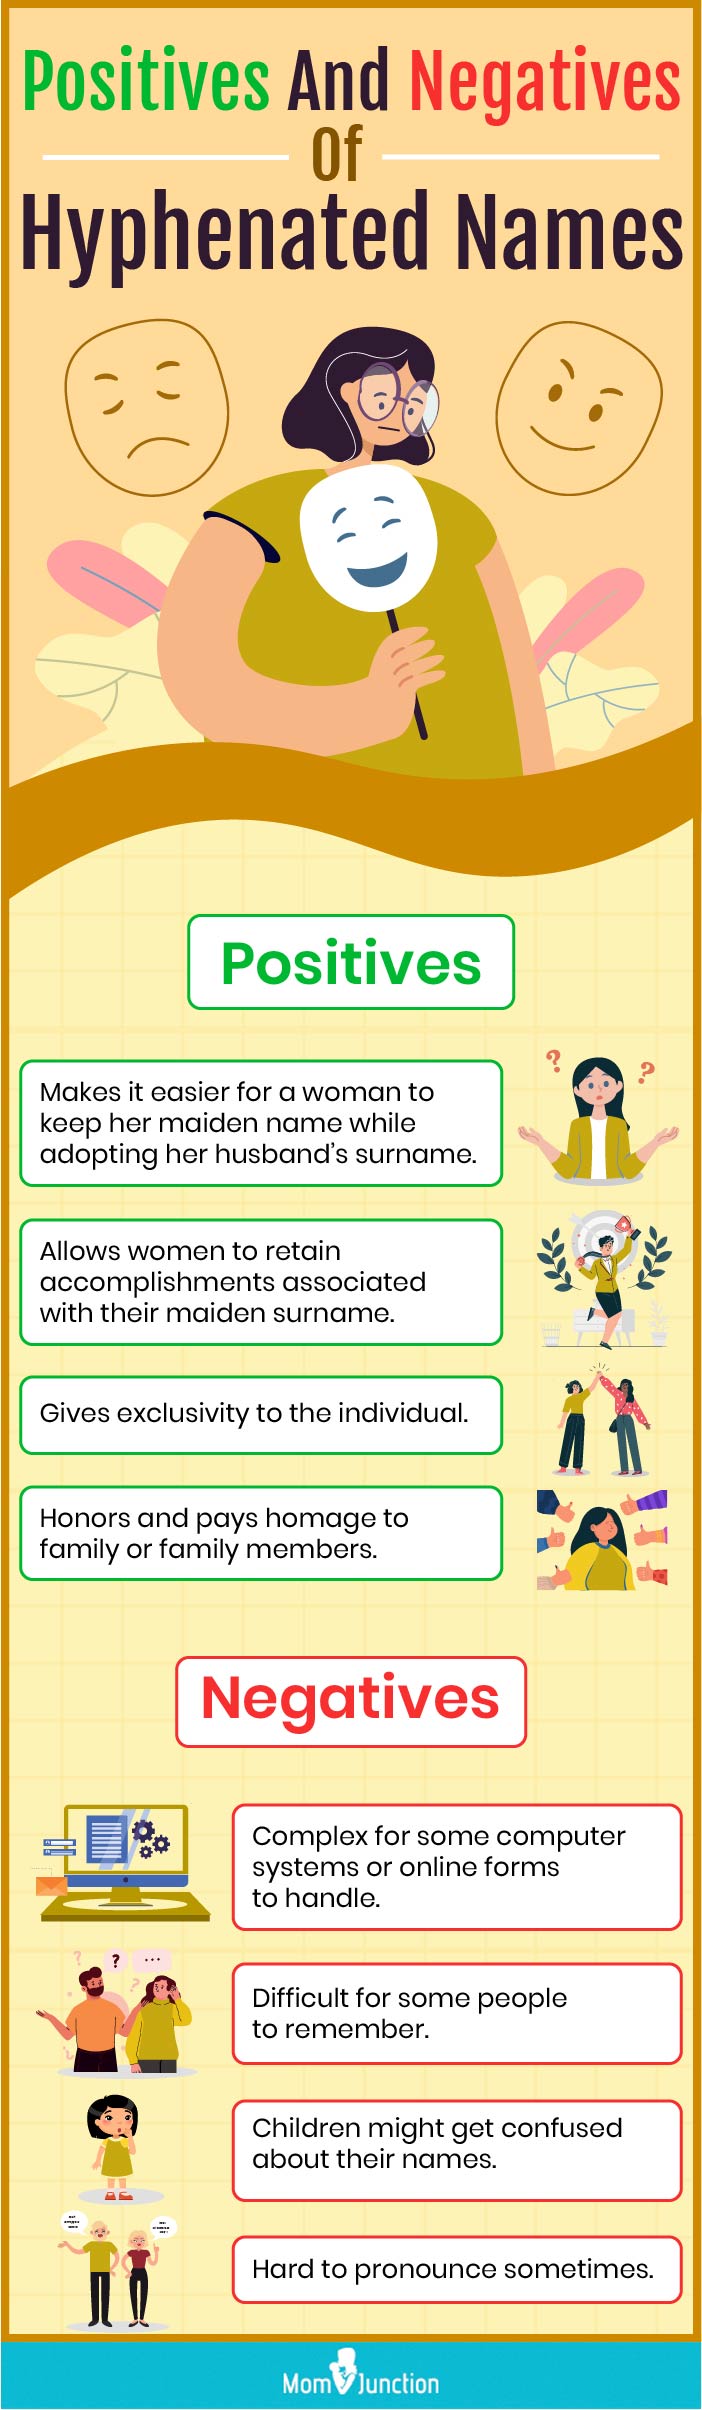 positives and negatives of hyphenated names (infographic)